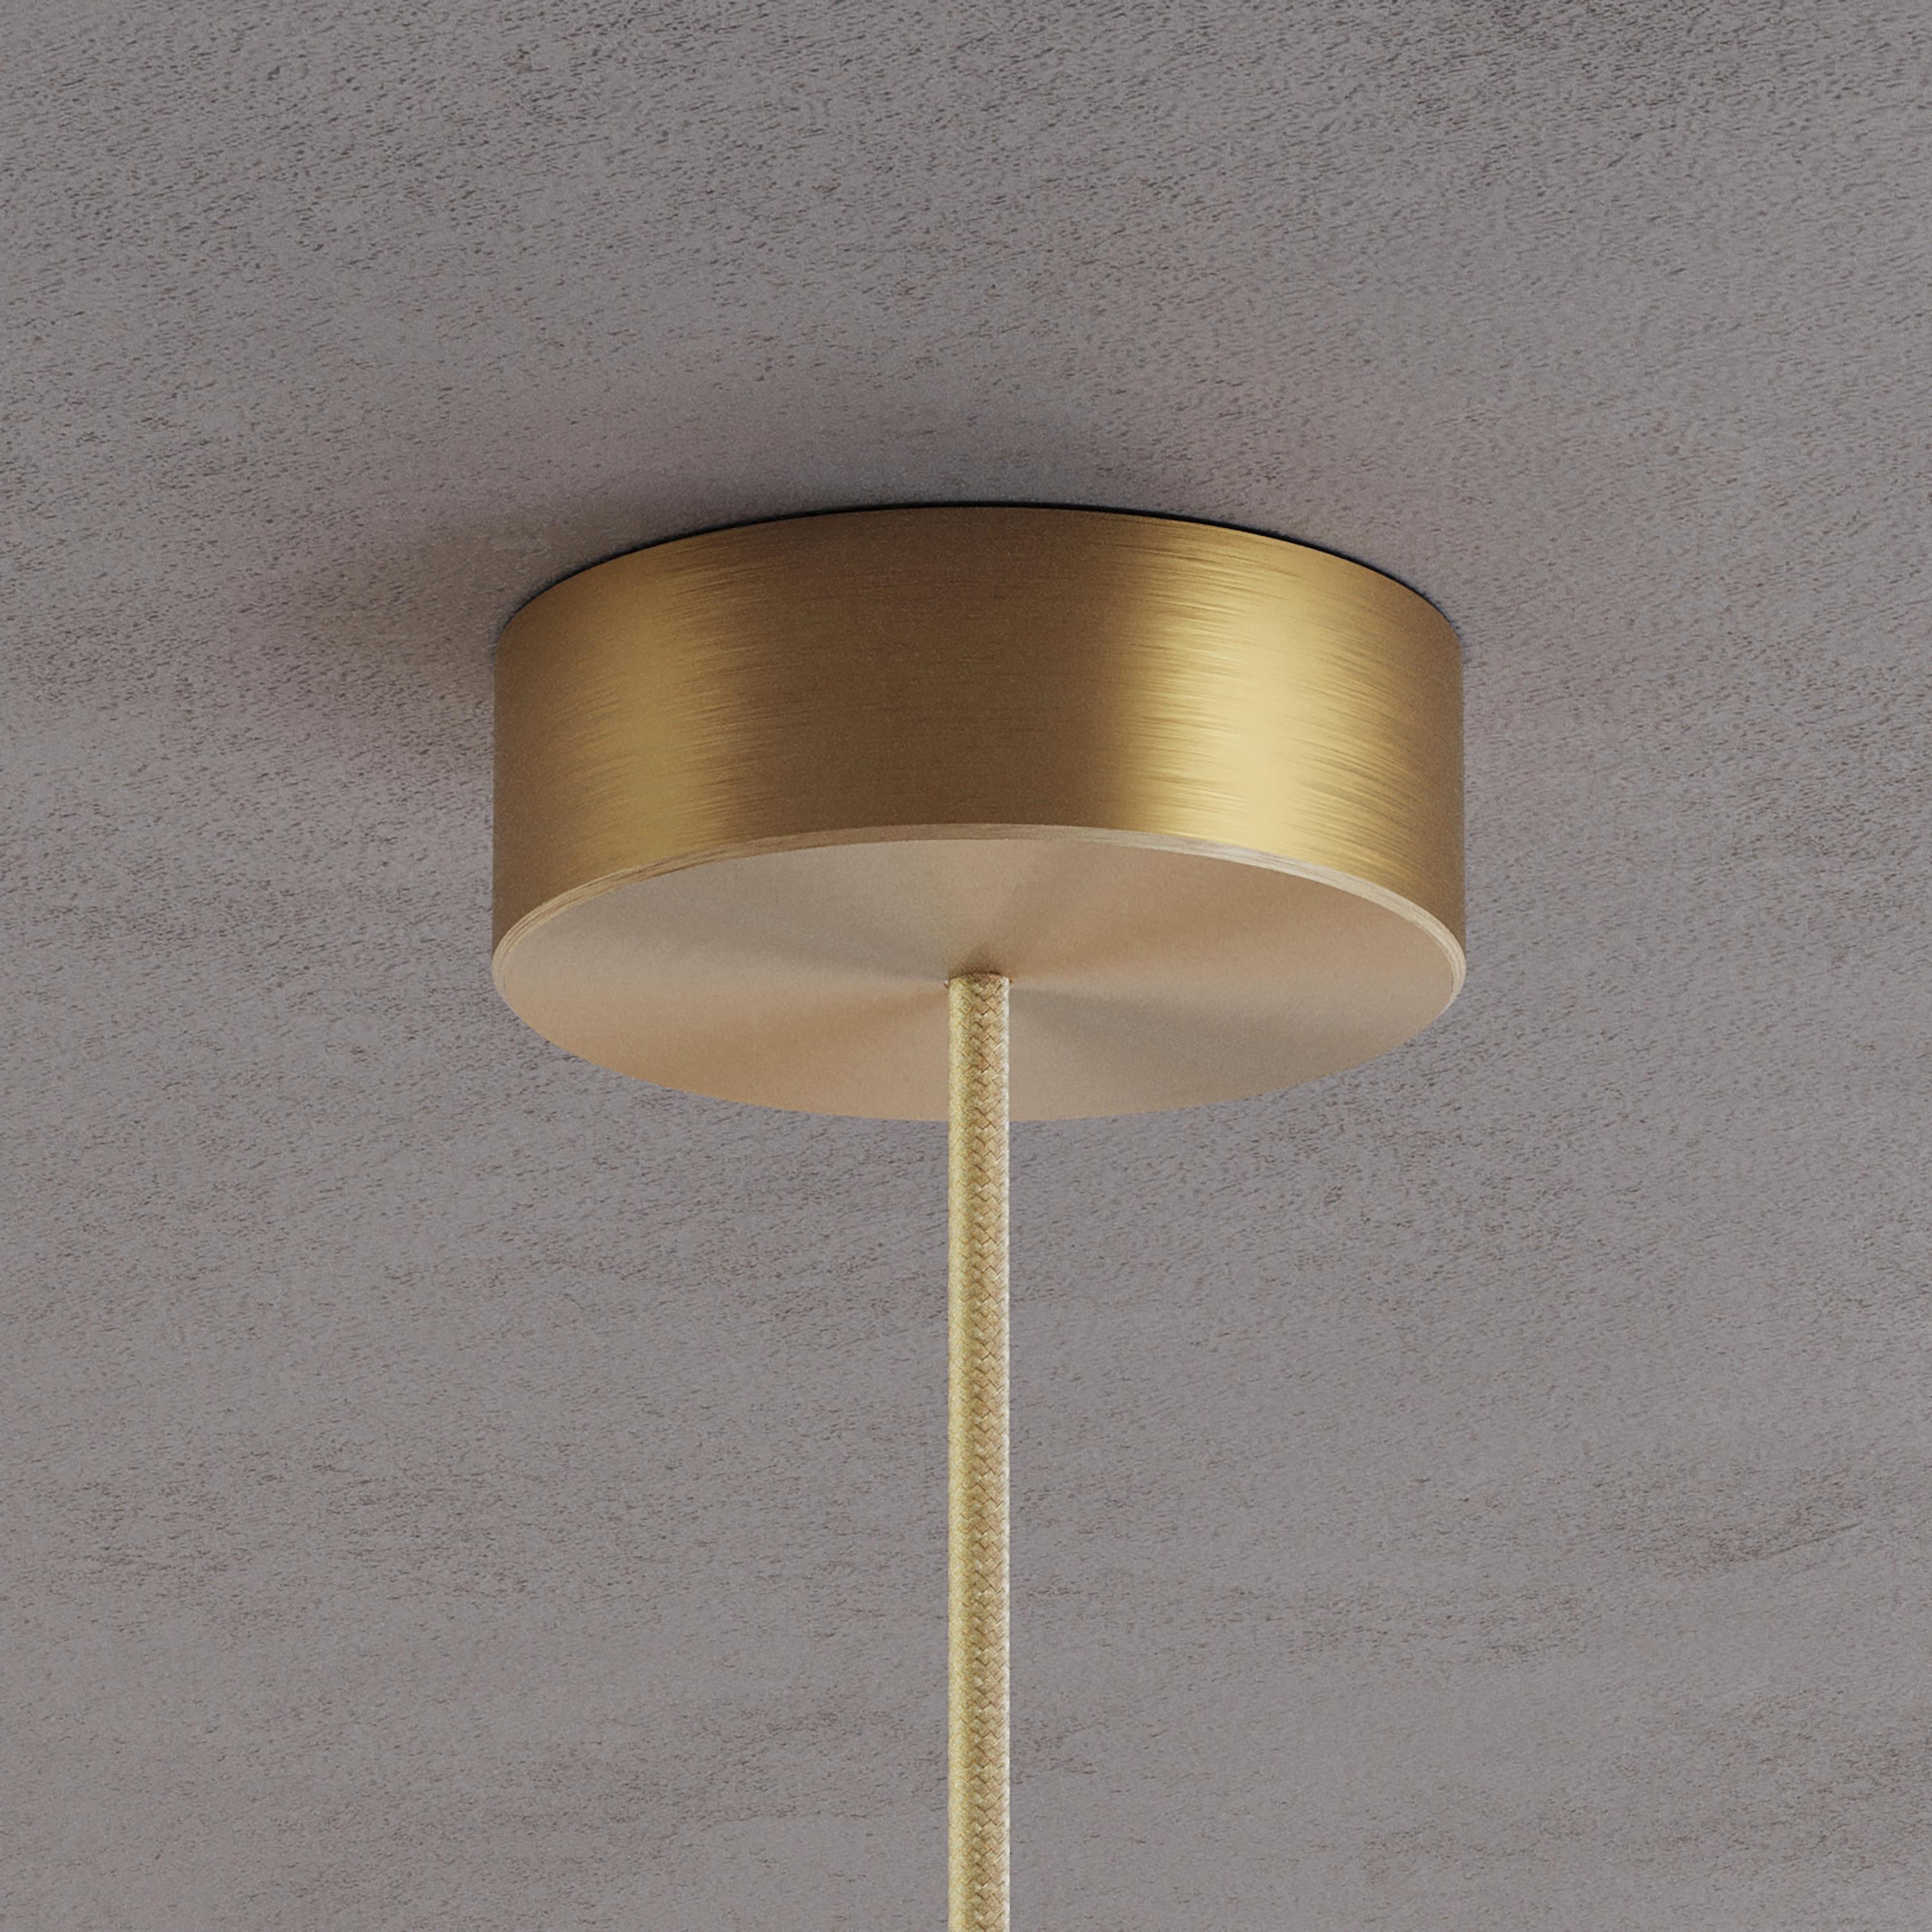 English 'Cosmic Ore Chandelier 70' Handmade Gradient Patinated Brass Ceiling Light For Sale